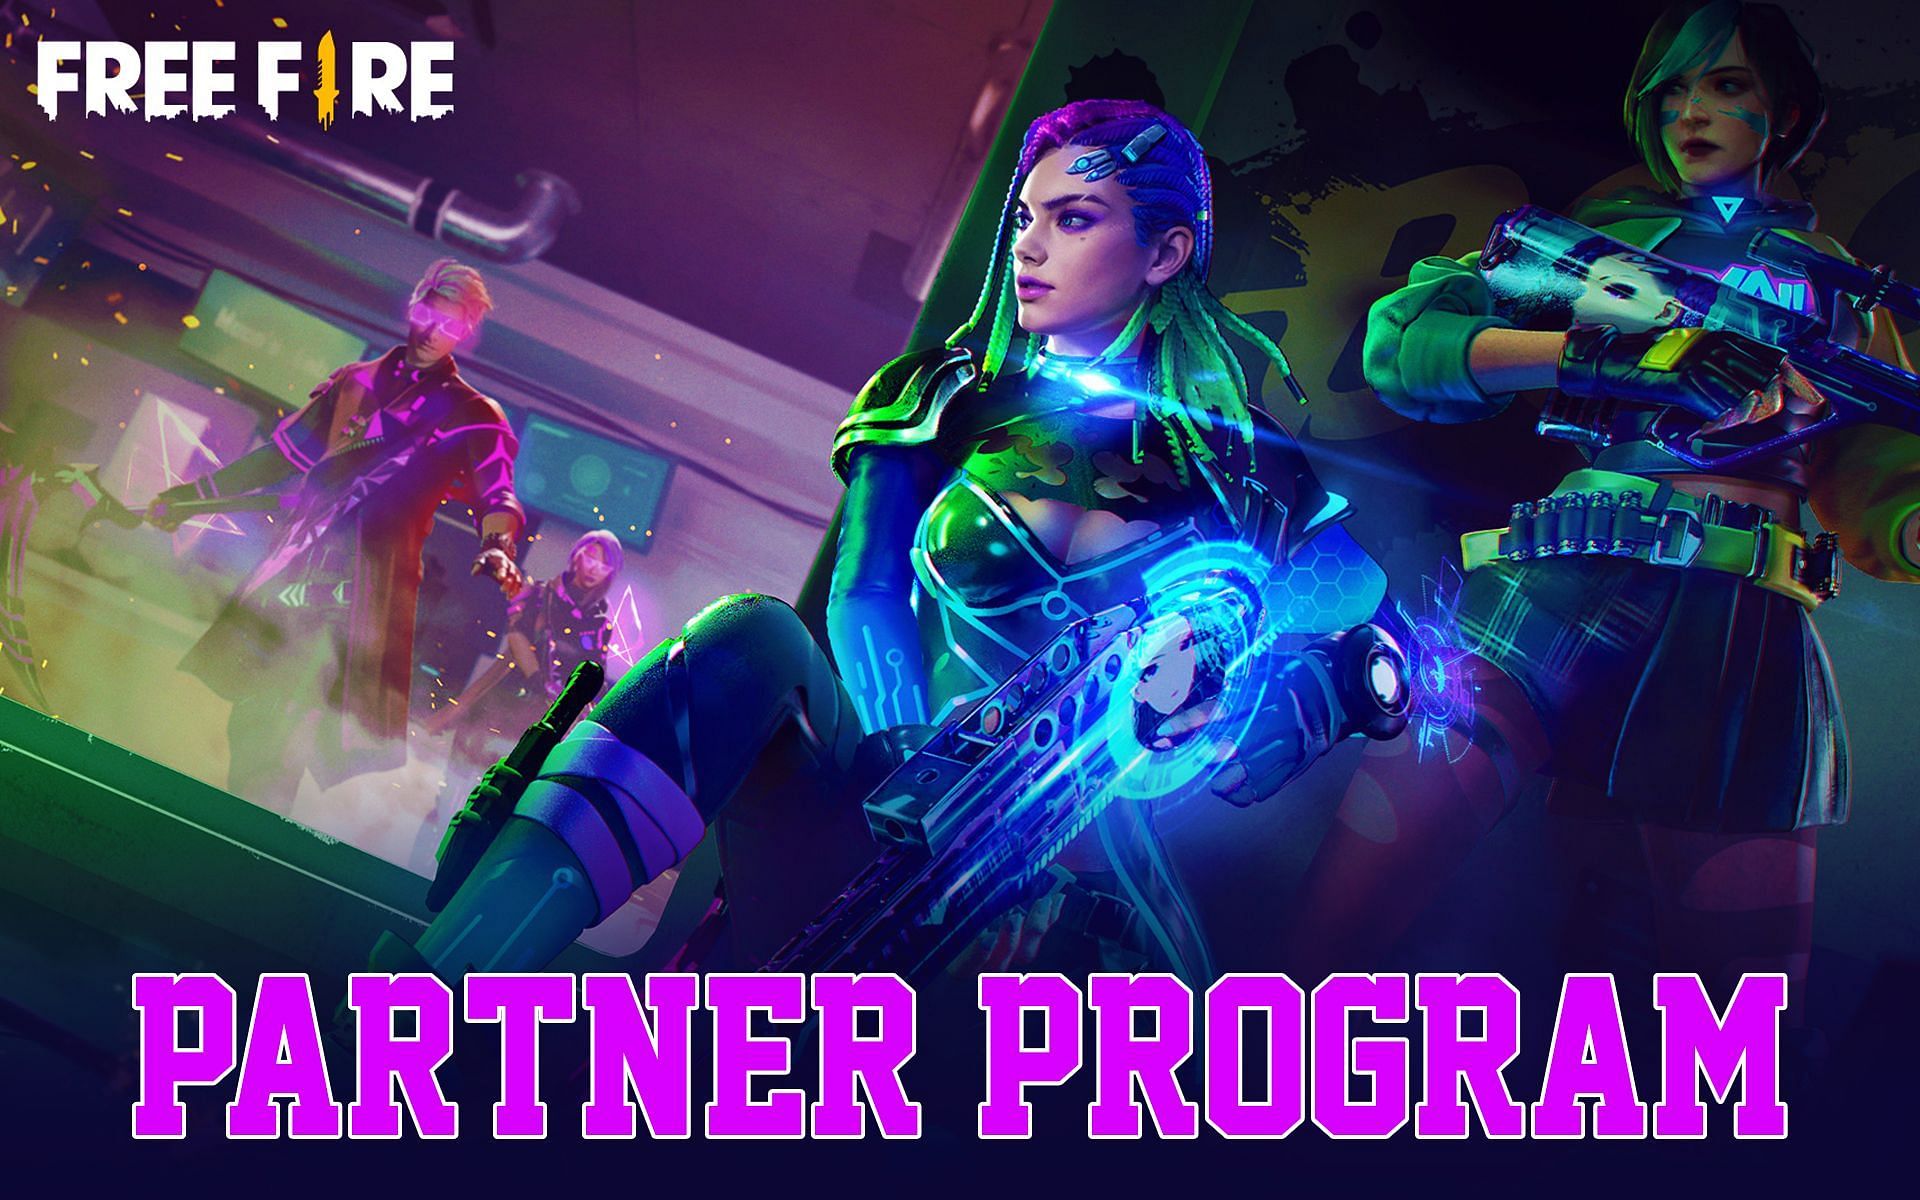 The Partner Program is meant for content creators and streamers (Image via Sportskeeda)